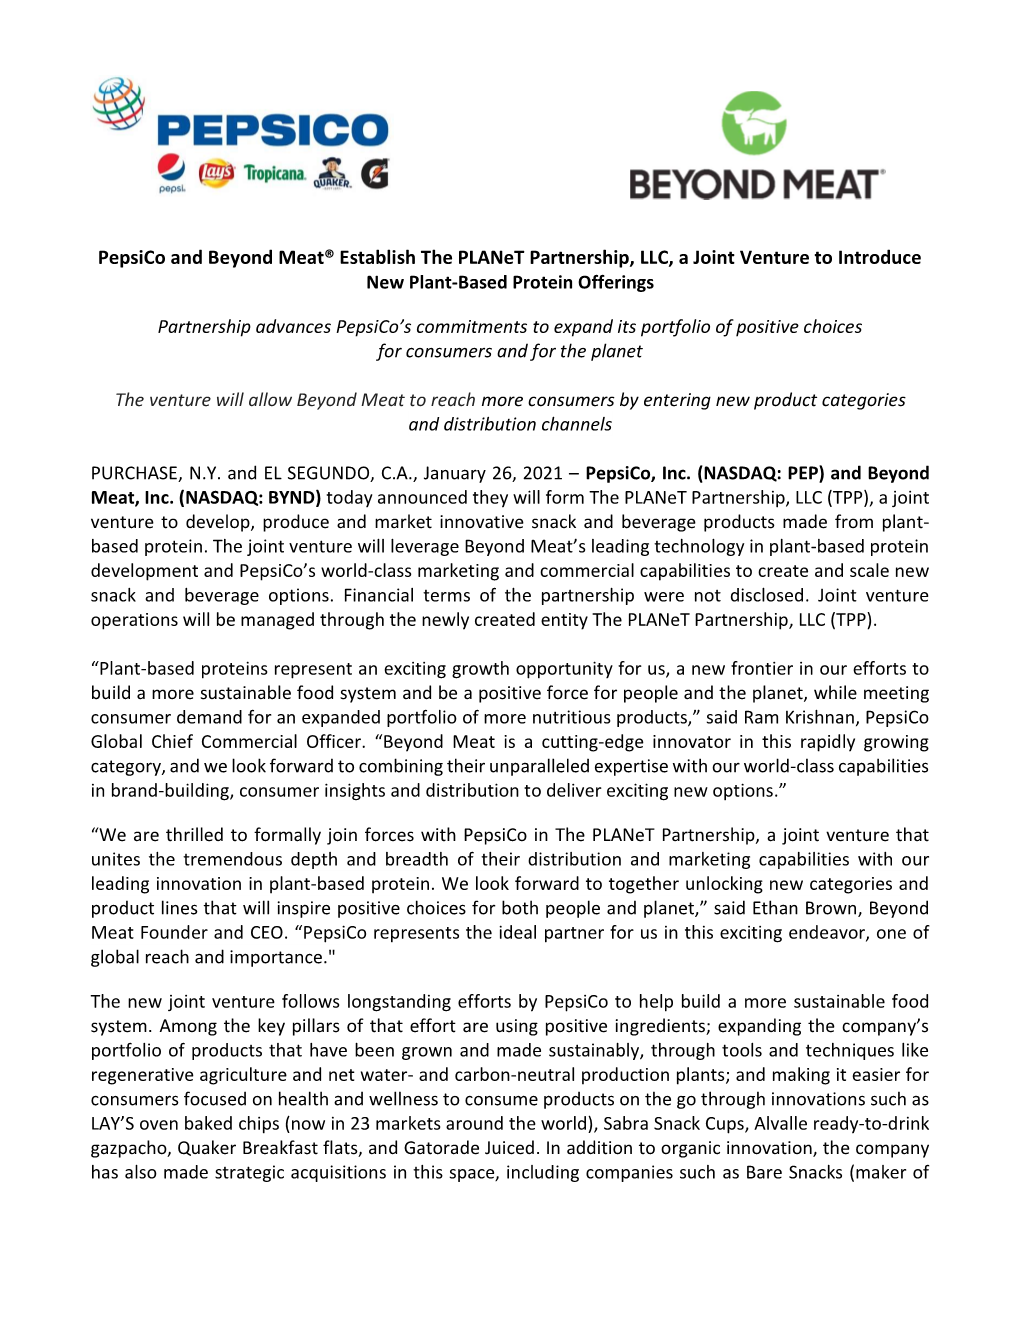 Pepsico and Beyond Meat® Establish the Planet Partnership, LLC, a Joint Venture to Introduce New Plant-Based Protein Offerings